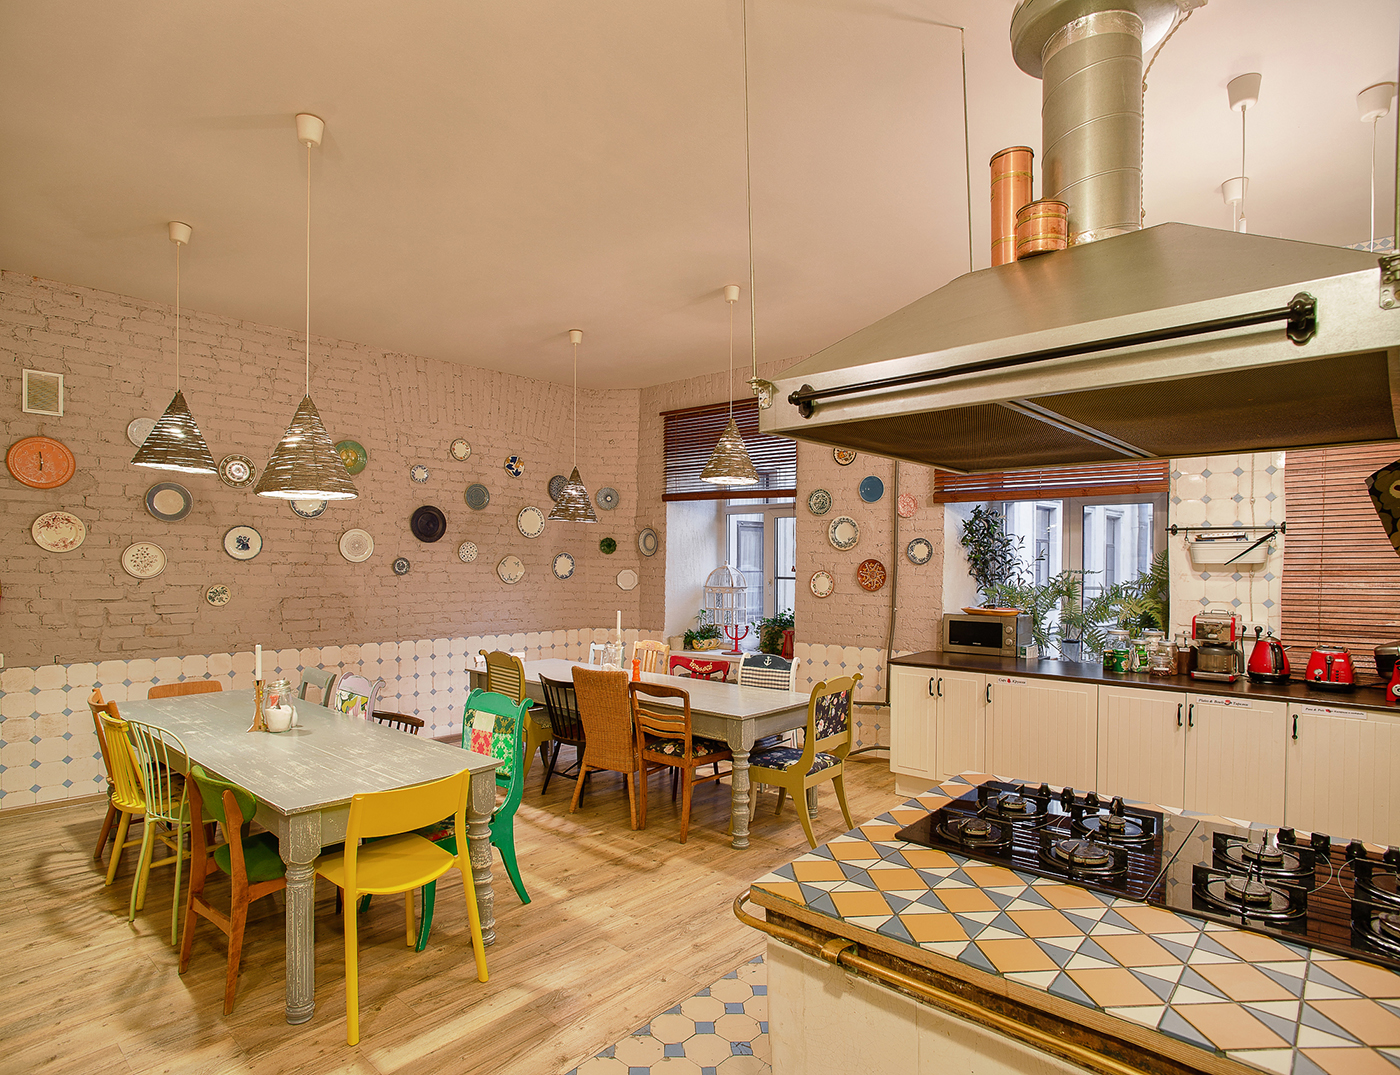 Kitchen and dining area at Soul Kitchen Hostel in St. Petersburg, Russia